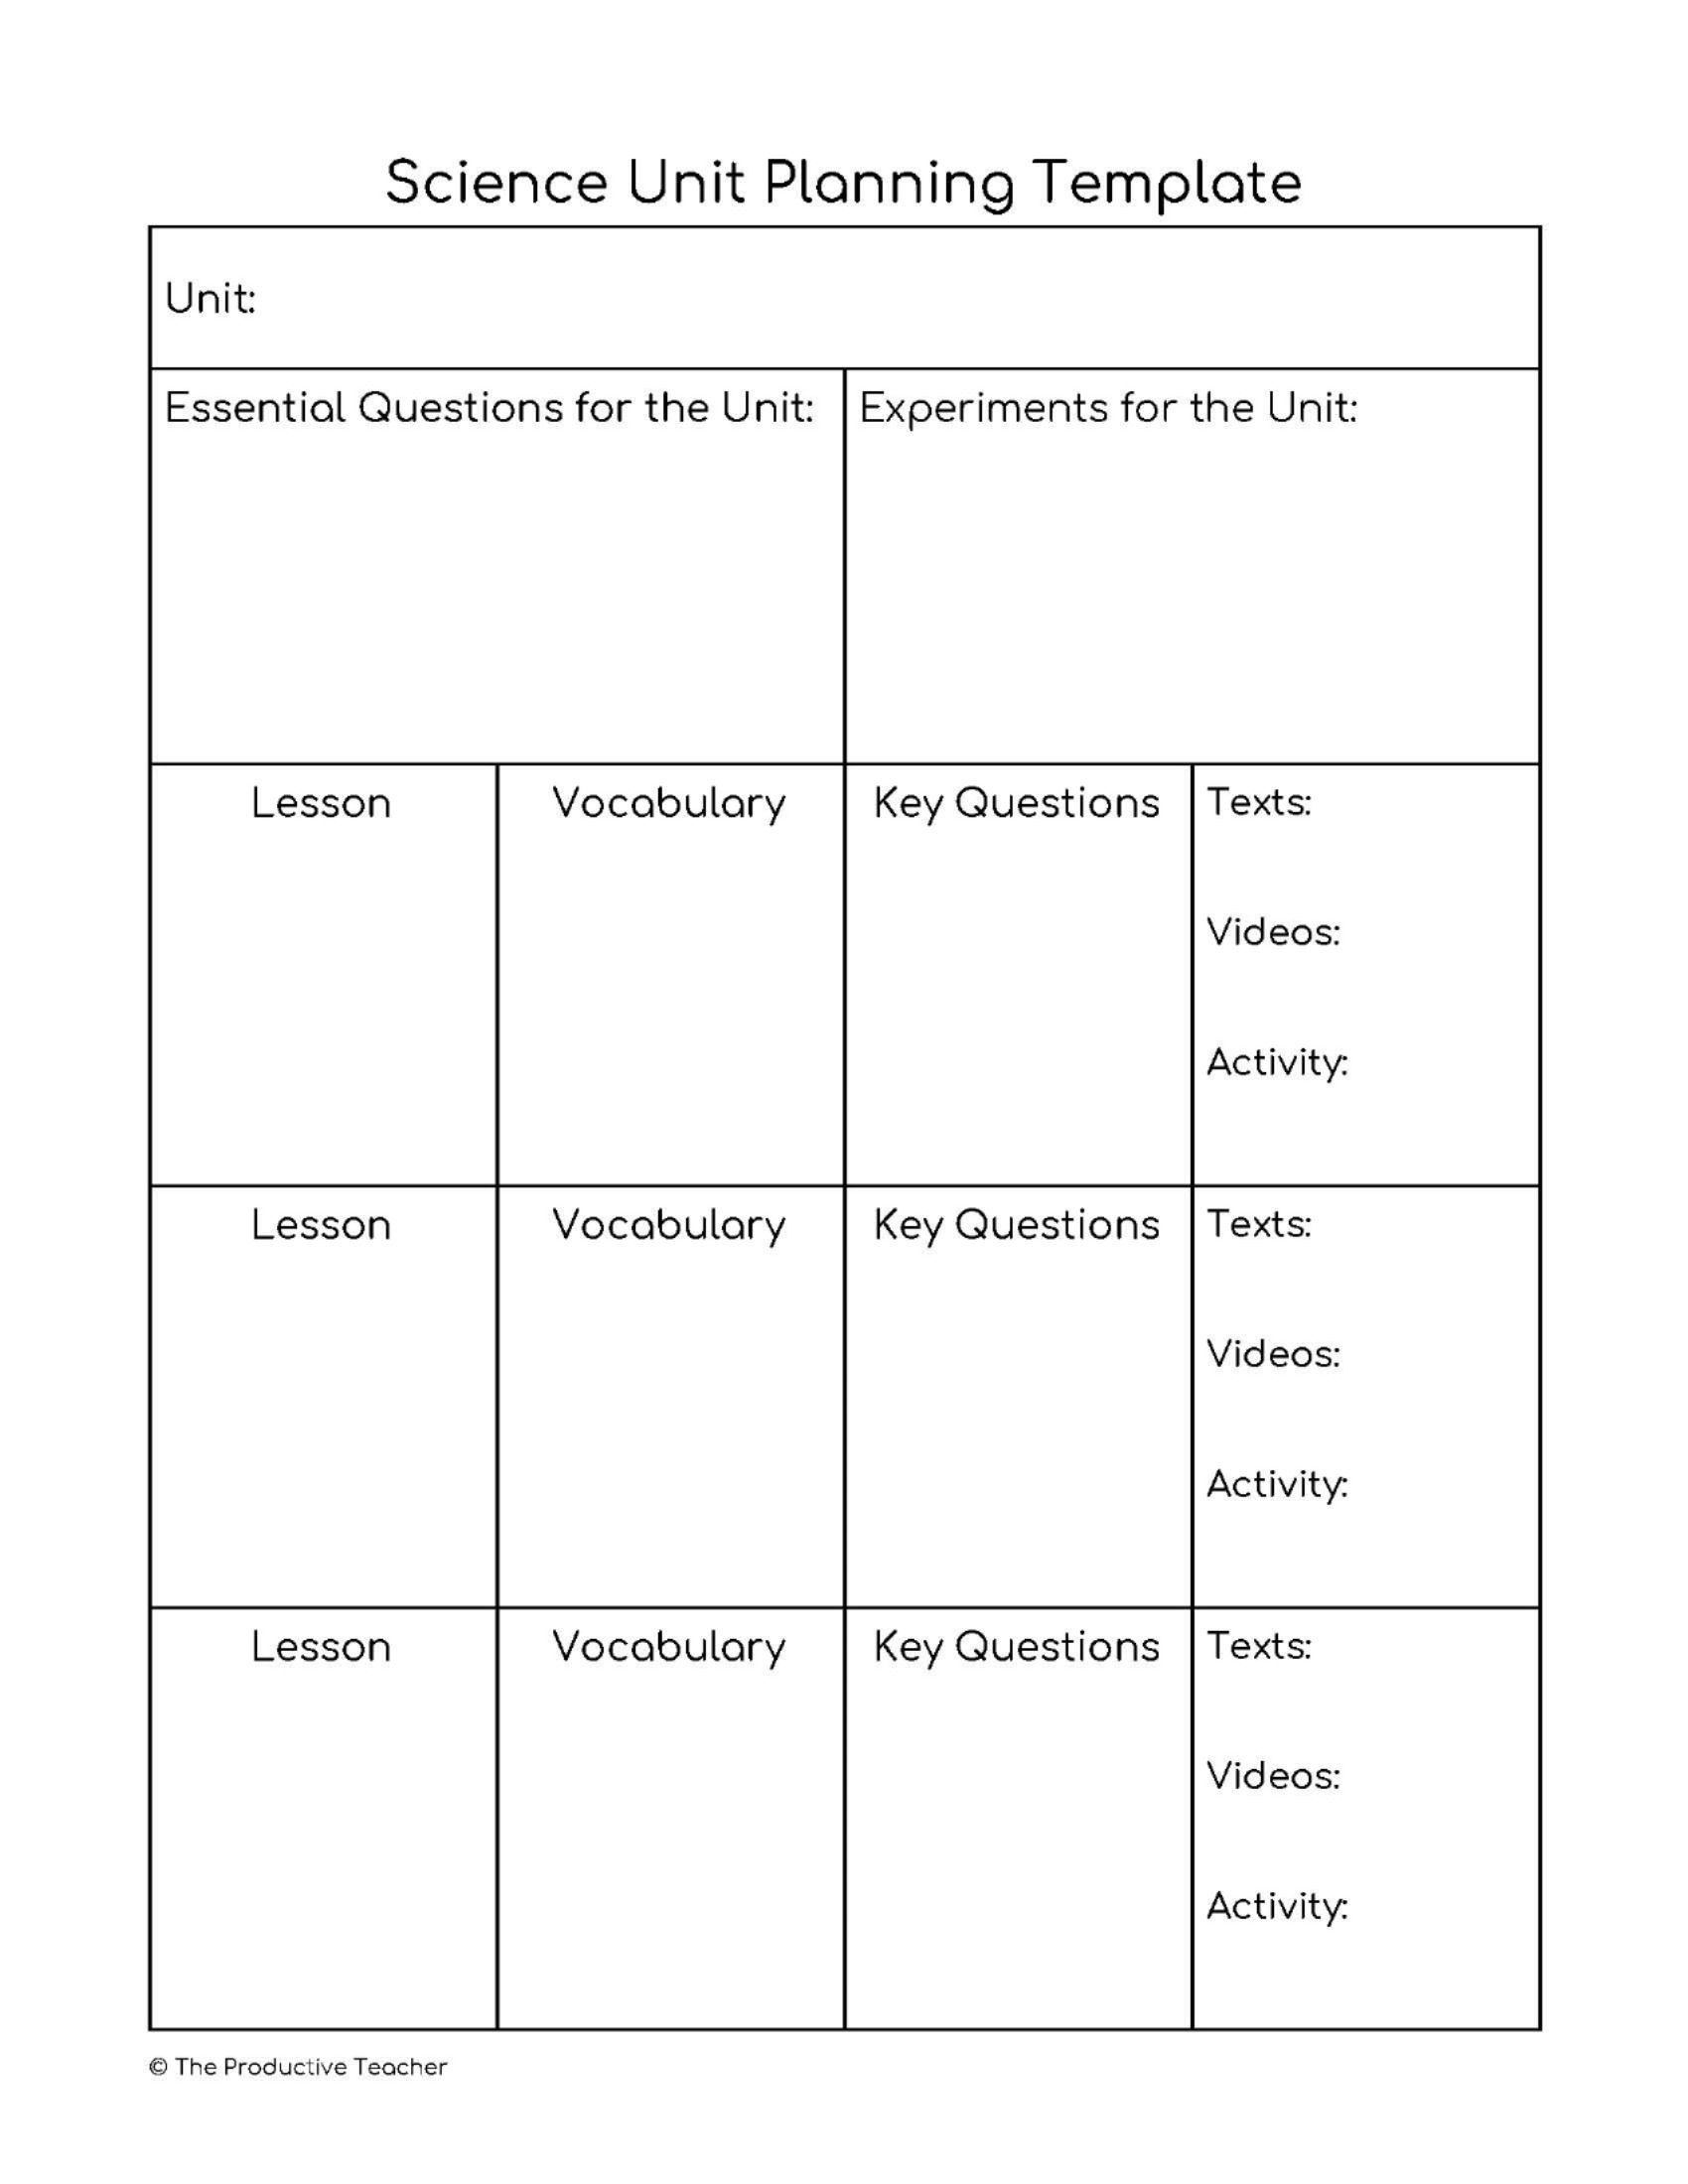 Middle School Science Lesson Plans Free Science Unit Planning Template for Middle School